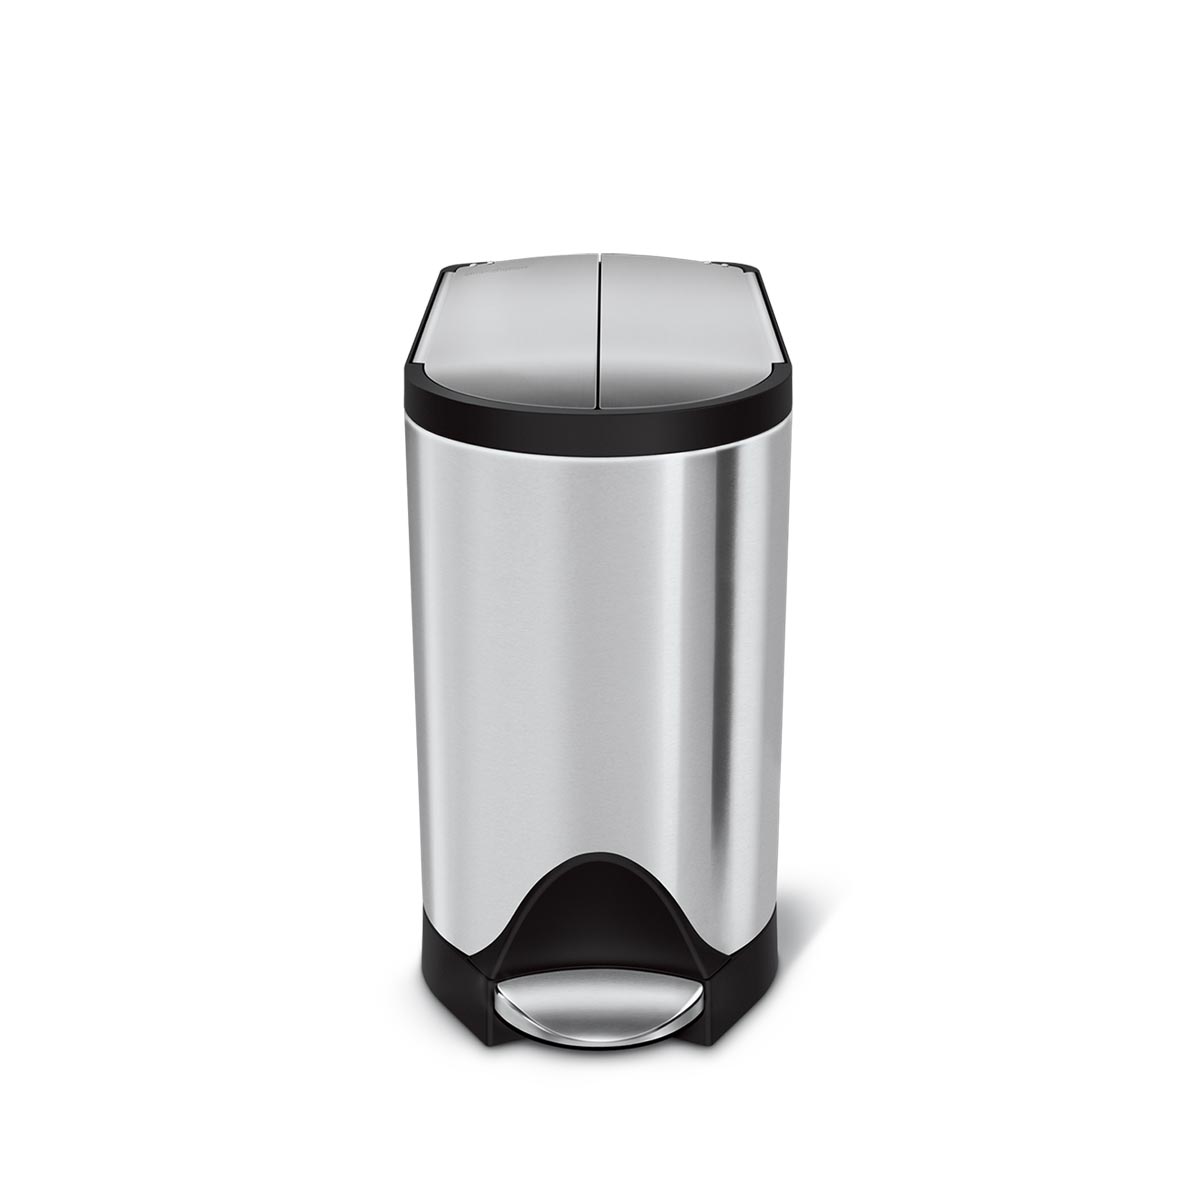 10L butterfly step can - simplehuman